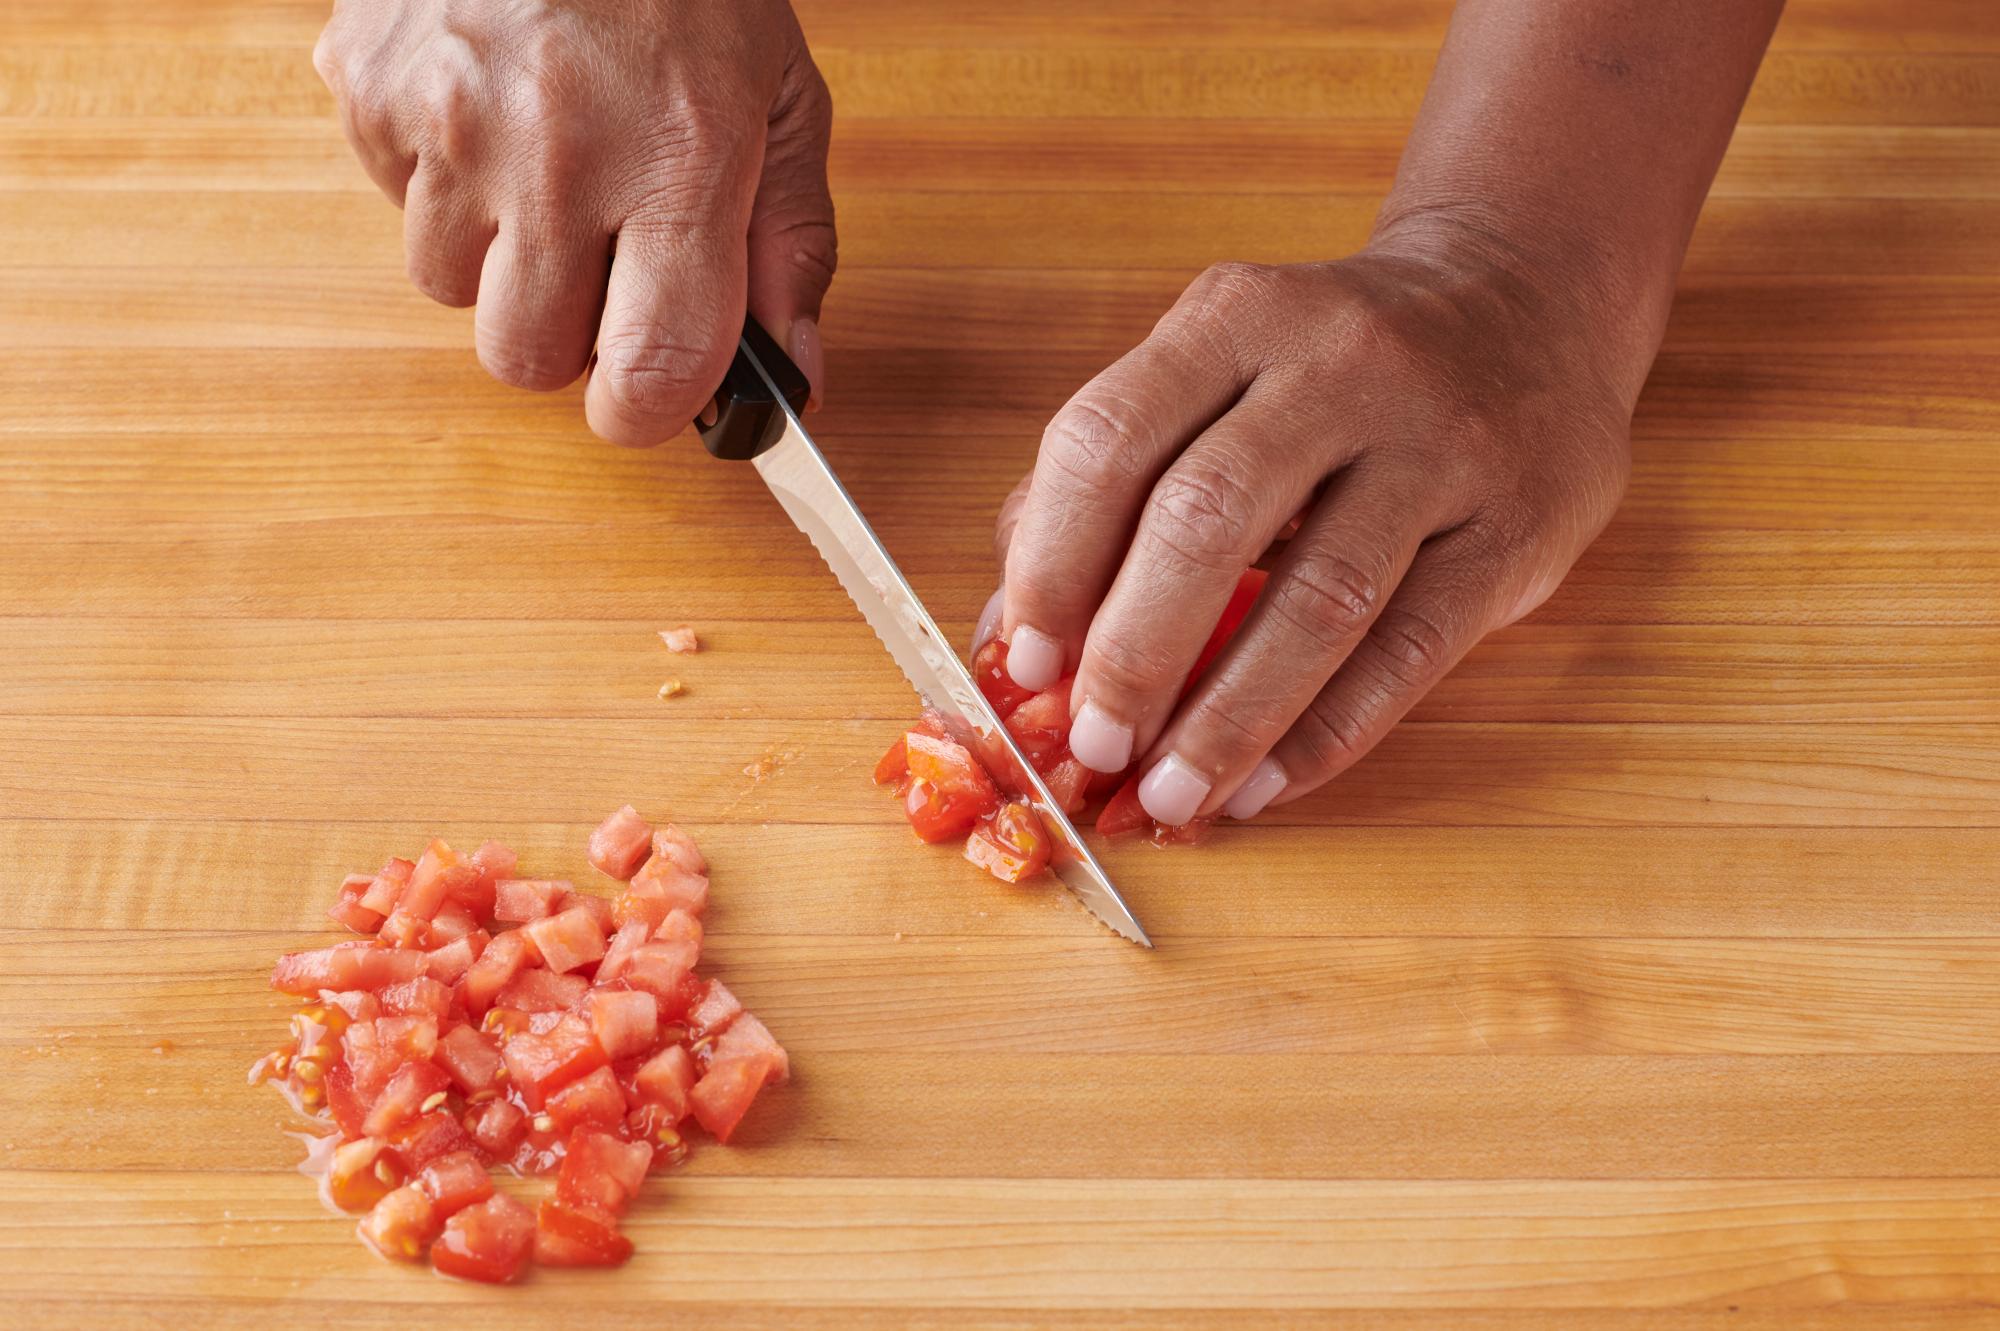 Cutting a tomato with a Trimmer.